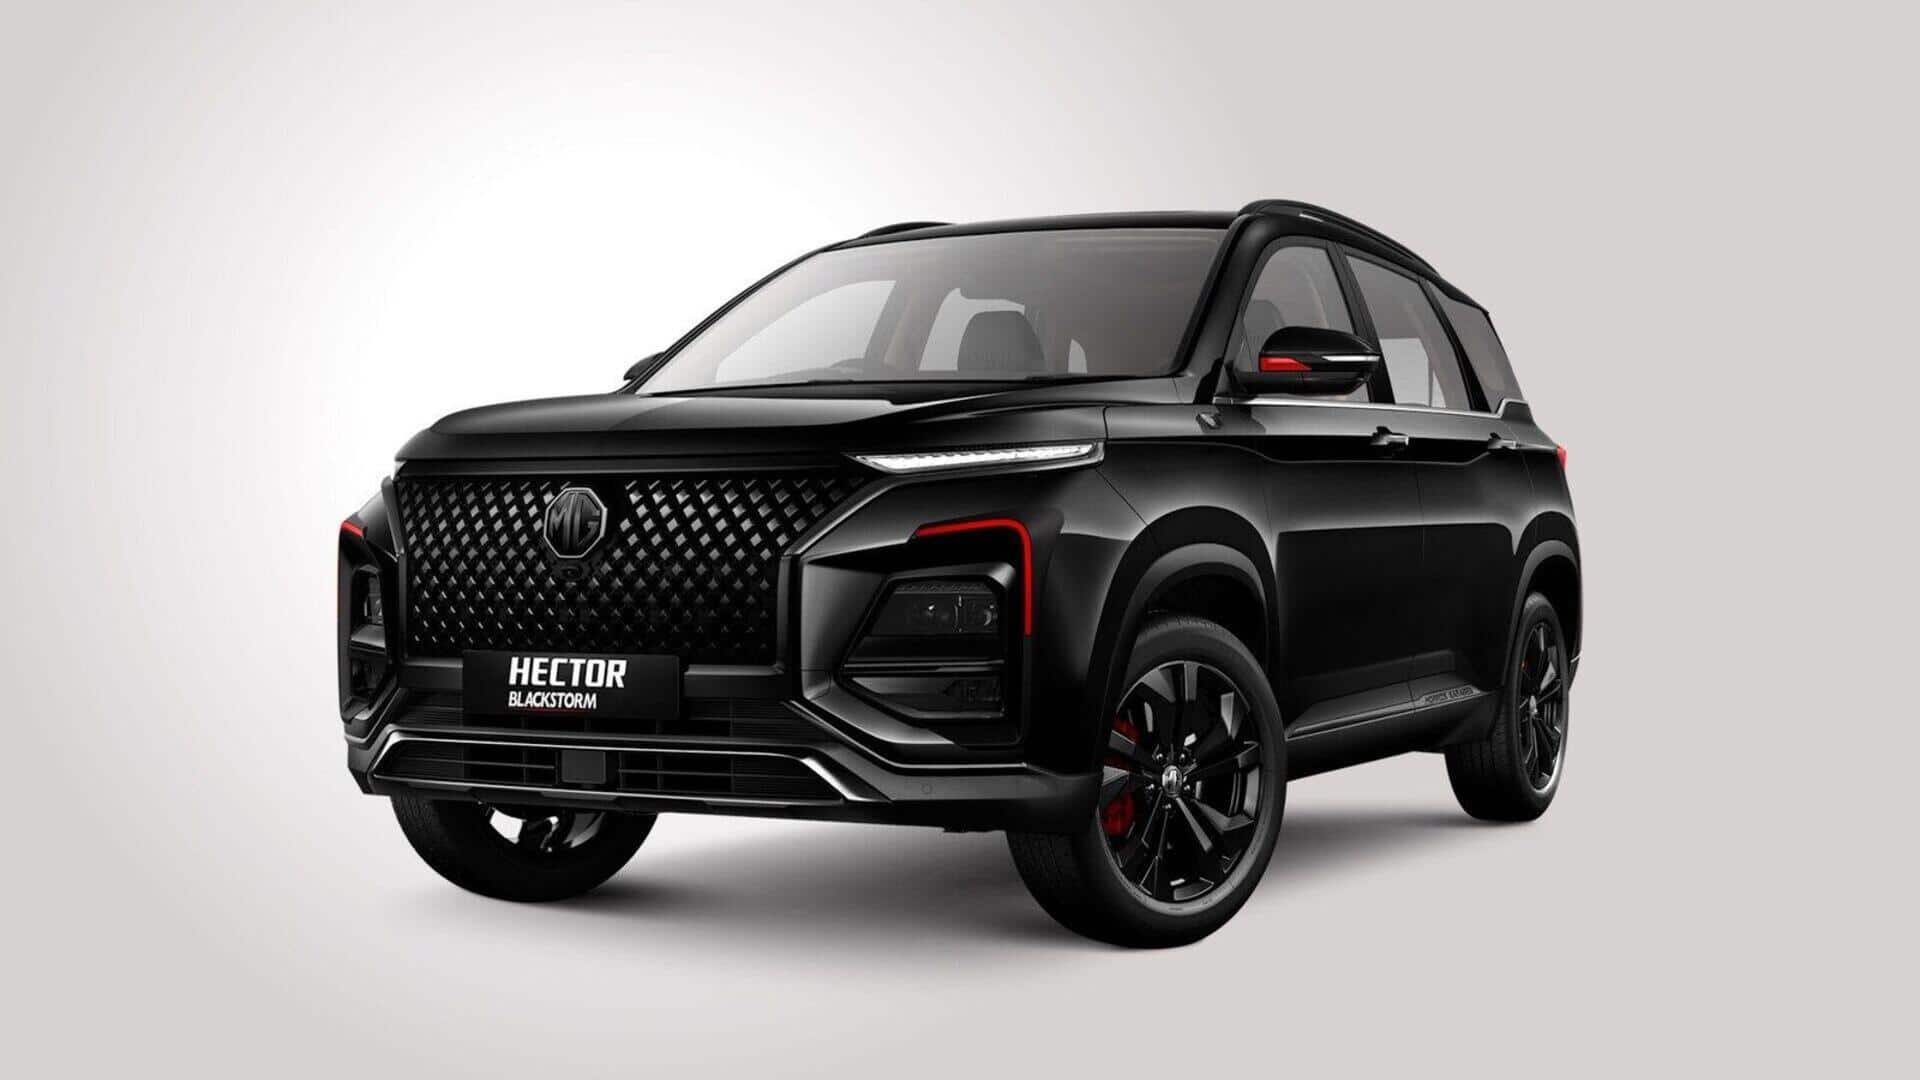 MG Hector Blackstorm Edition launched at ₹21.25 lakh: Check features